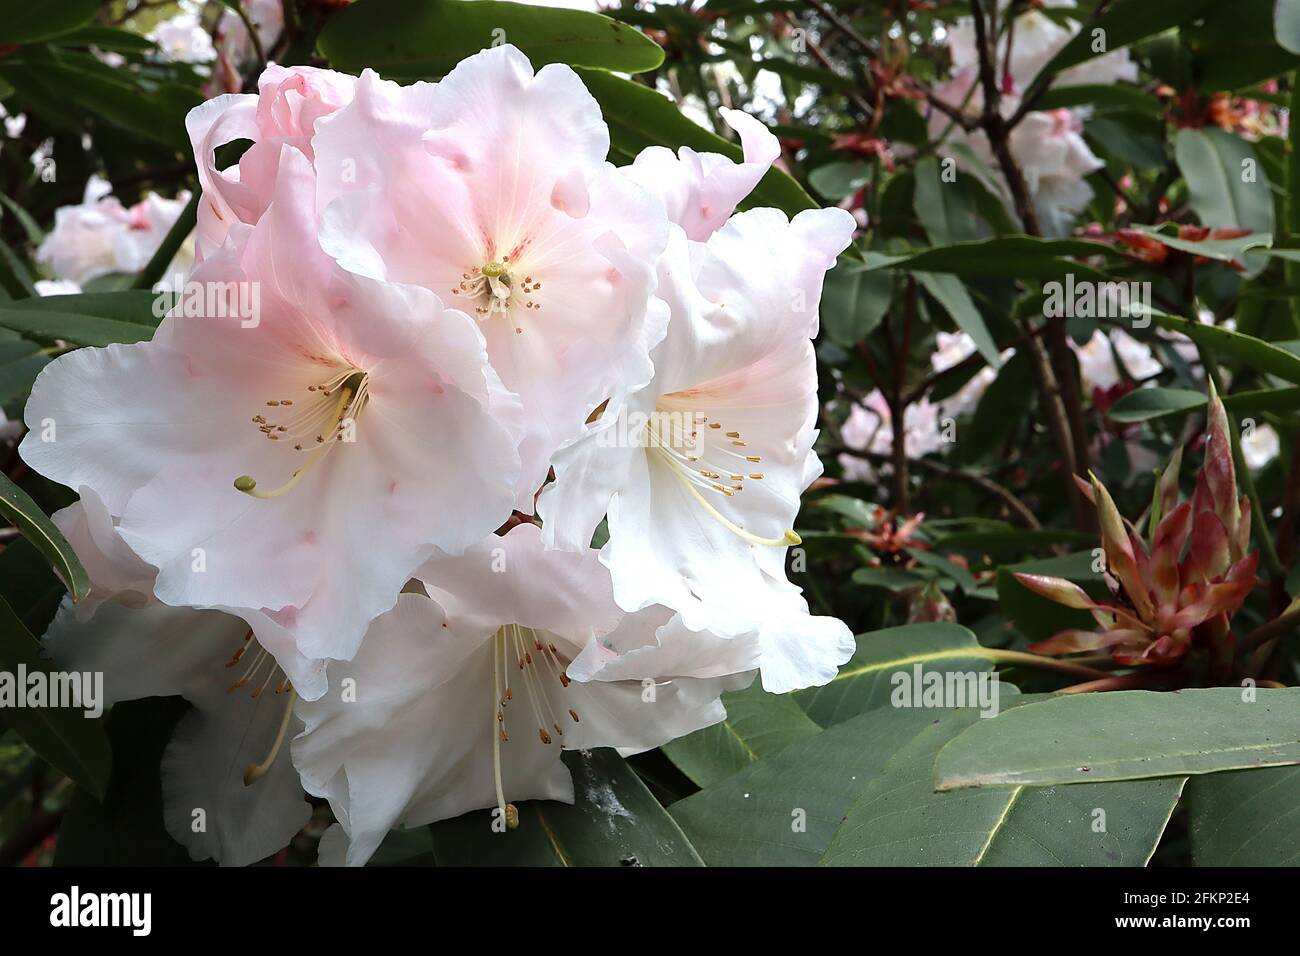 Rhododendron auriculatum Large white funnel-shaped flowers, long oblong dark green leaves,  May, England, UK Stock Photo